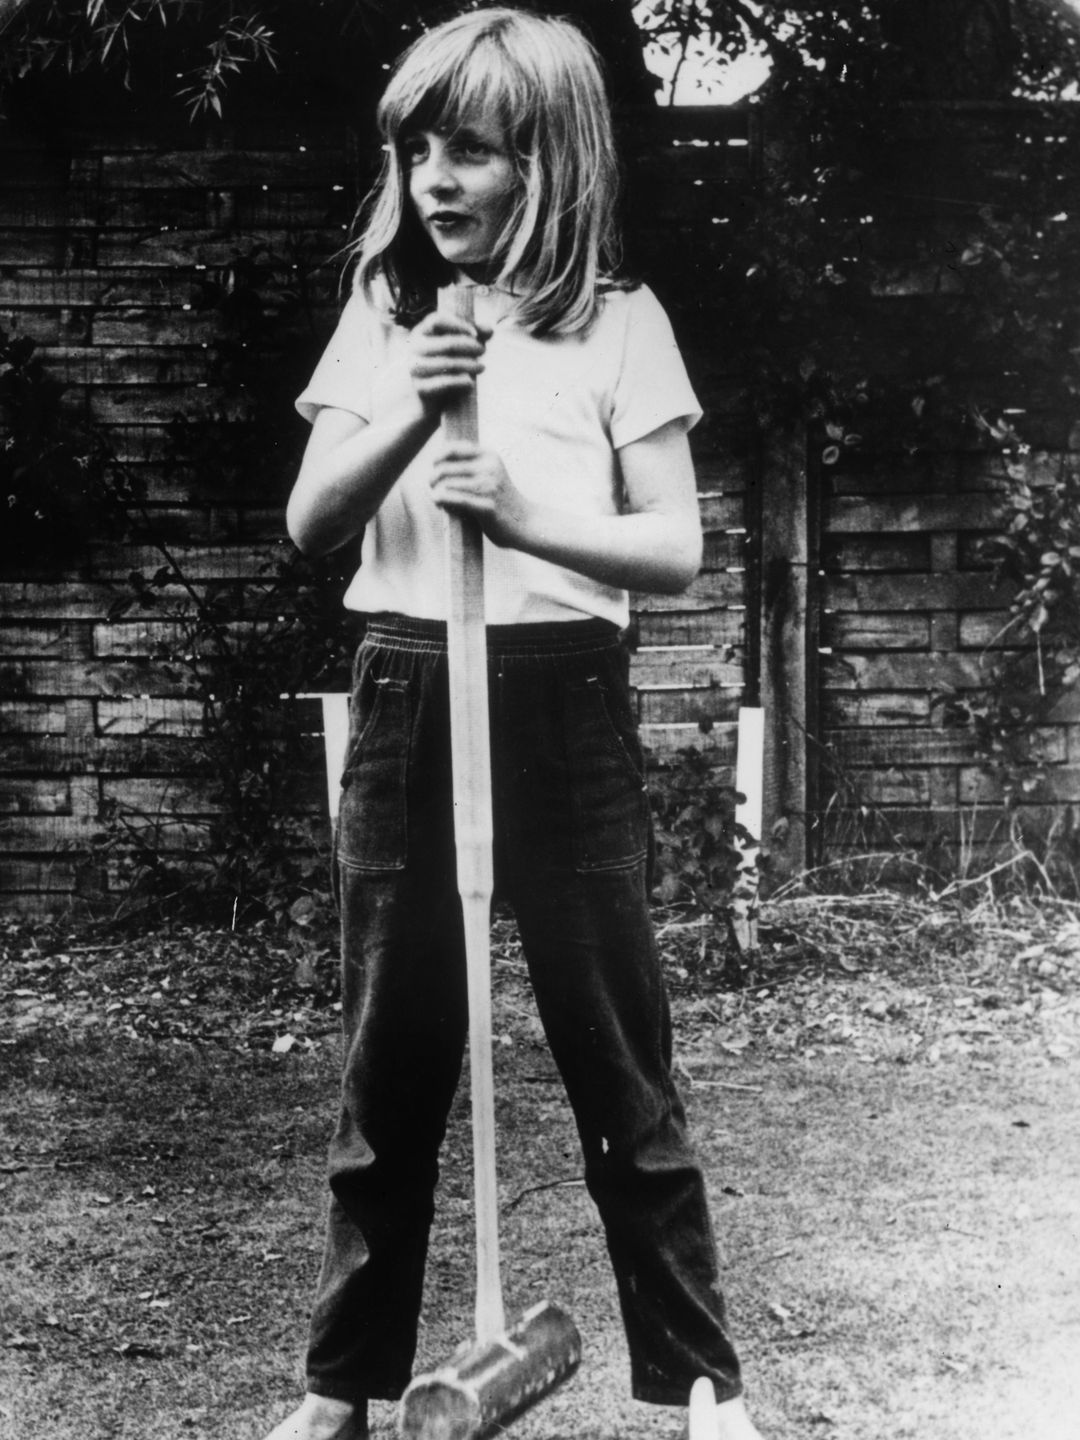 A young Princess Diana holding a croquet mallet